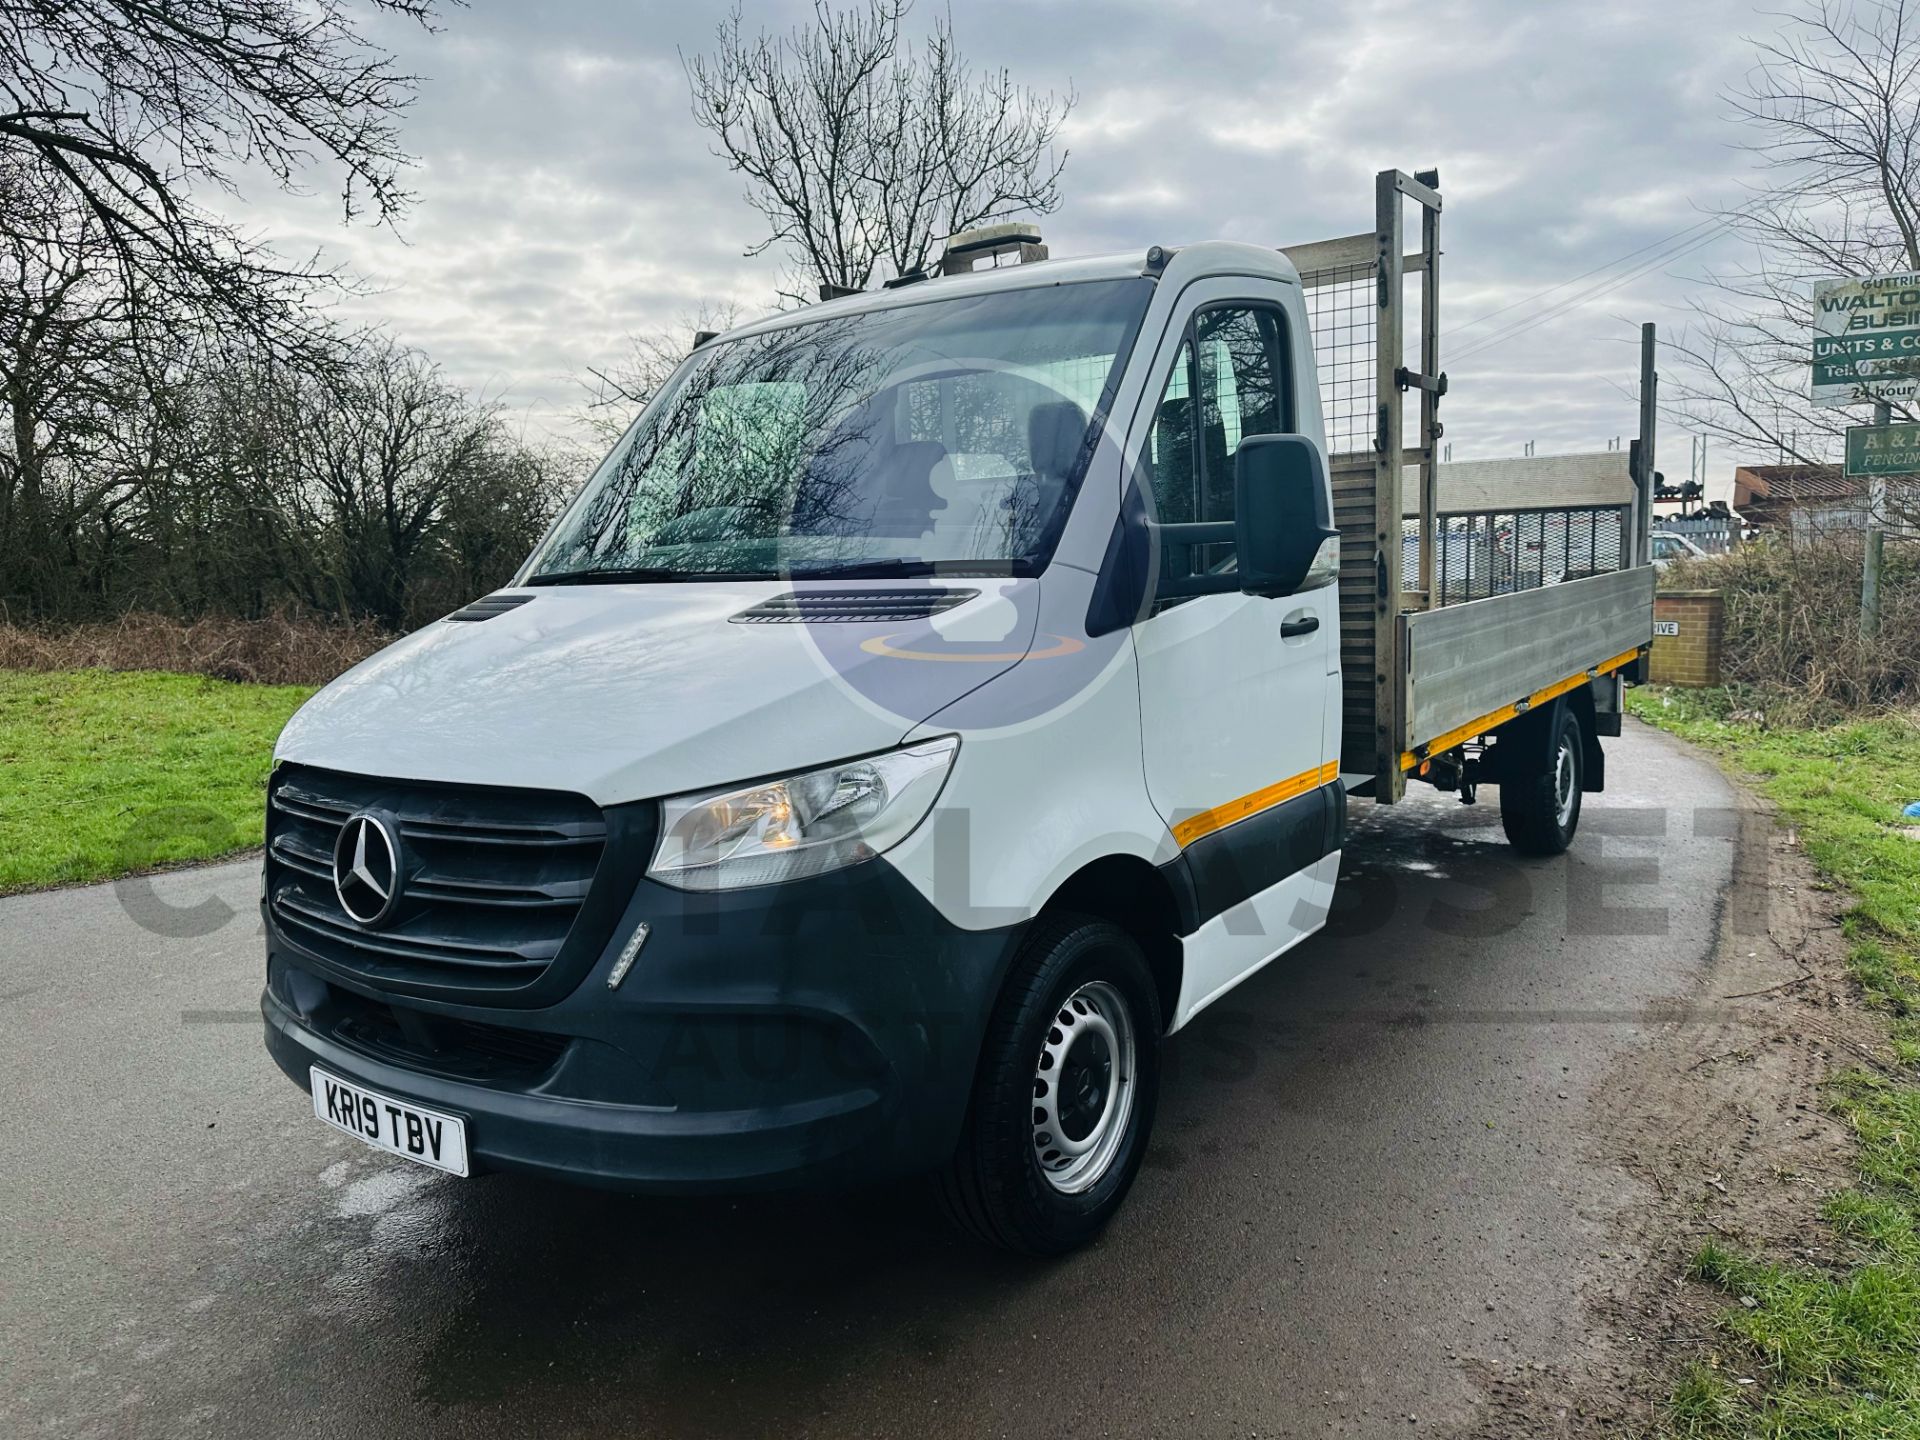 (ON SALE) MERCEDES SPRINTER 314CDI "LWB" DROPSIDE WITH ELECTRIC TAIL-LIFT - 19 REG - 1 OWNER - FSH - Image 4 of 28